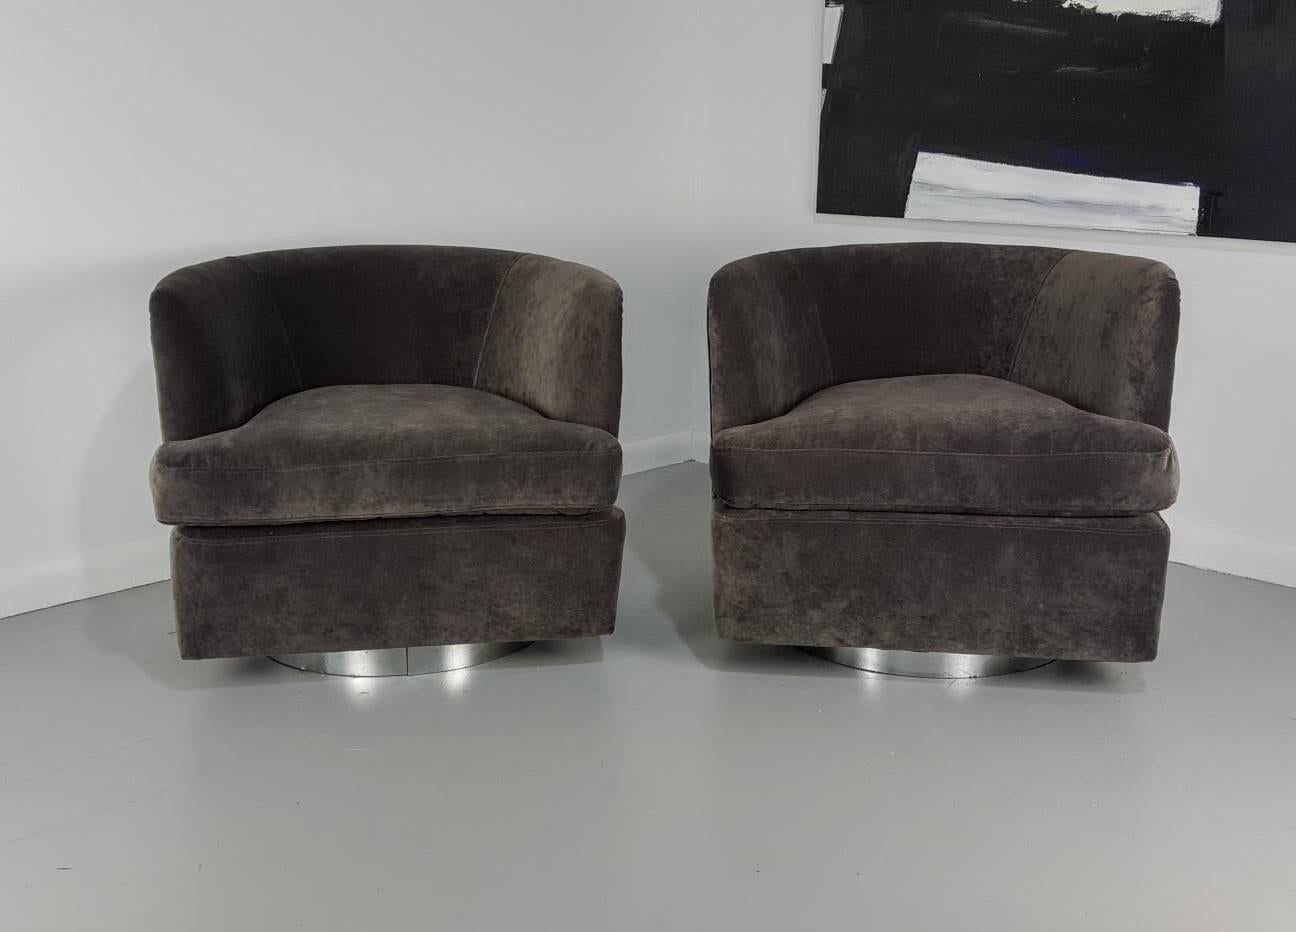 Milo Baughman chrome clad swivel lounge chairs for Thayer Coggin, 1970s. Incredible design and quality. Newly reupholstered in a soft low pile velvet. Chrome backs are in good vintage condition with normal wear, a few light dings and surface